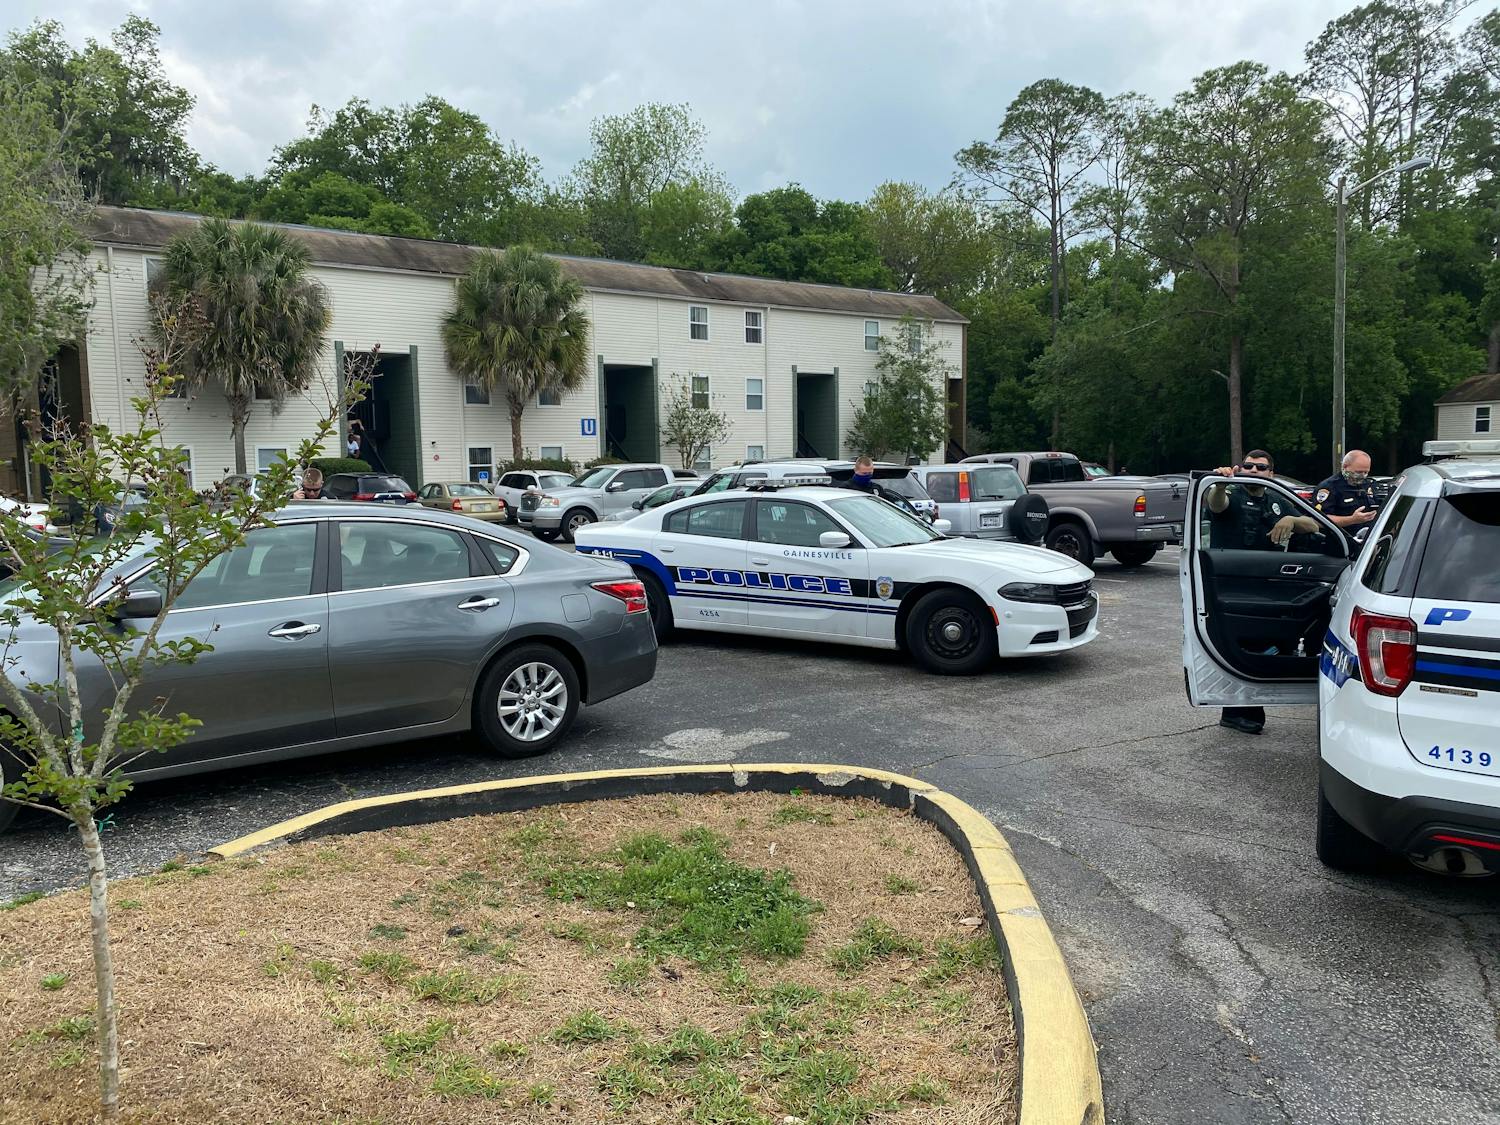 Police were called to the Bivens Cove apartment complex at 12:31 p.m. on Monday.